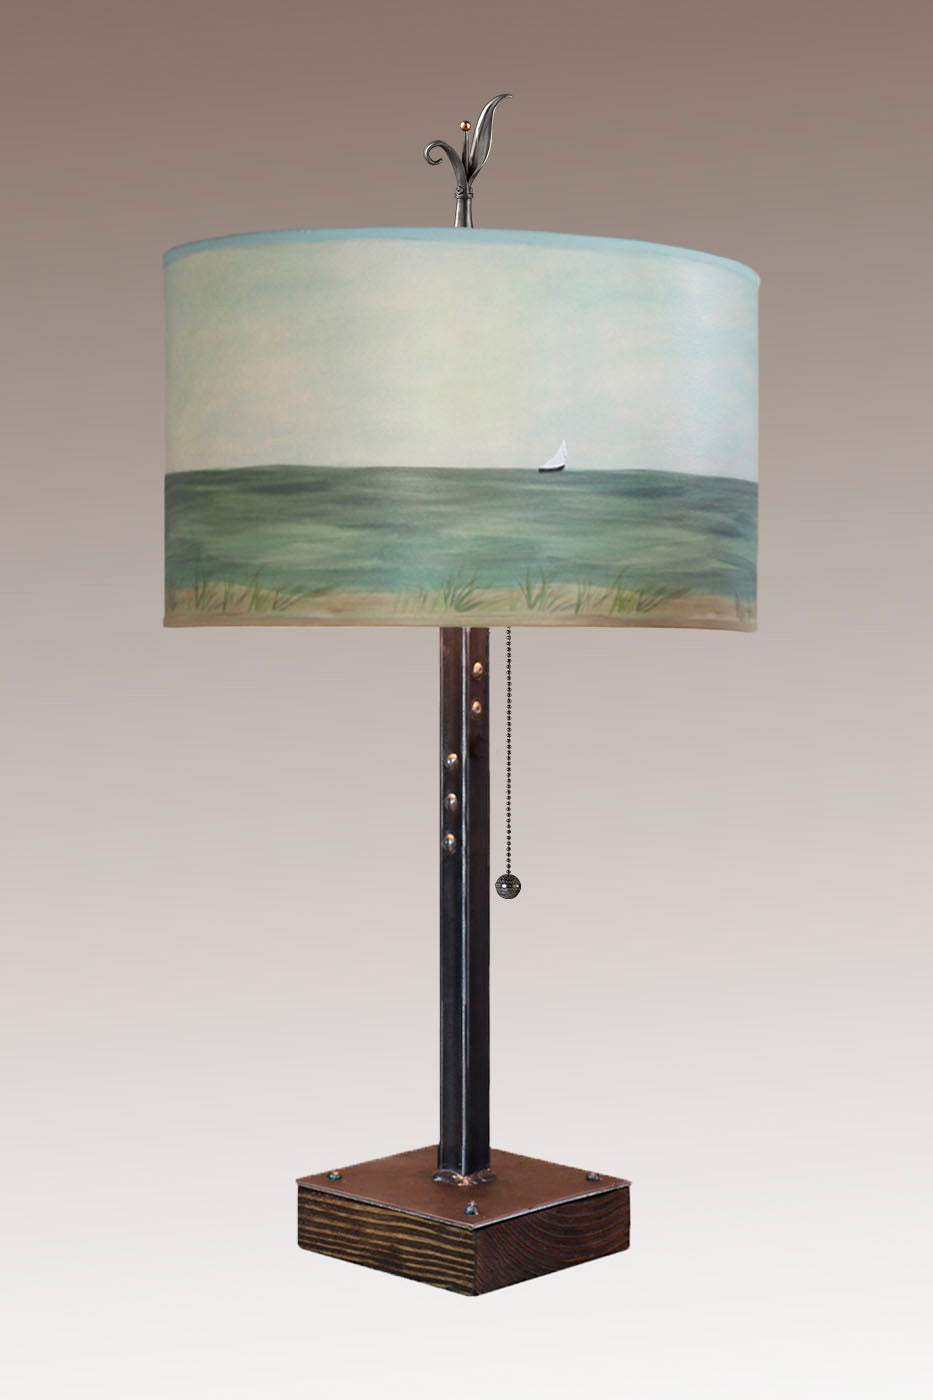 Janna Ugone & Co Table Lamps Steel Table Lamp on Wood with Large Drum Shade in Shore